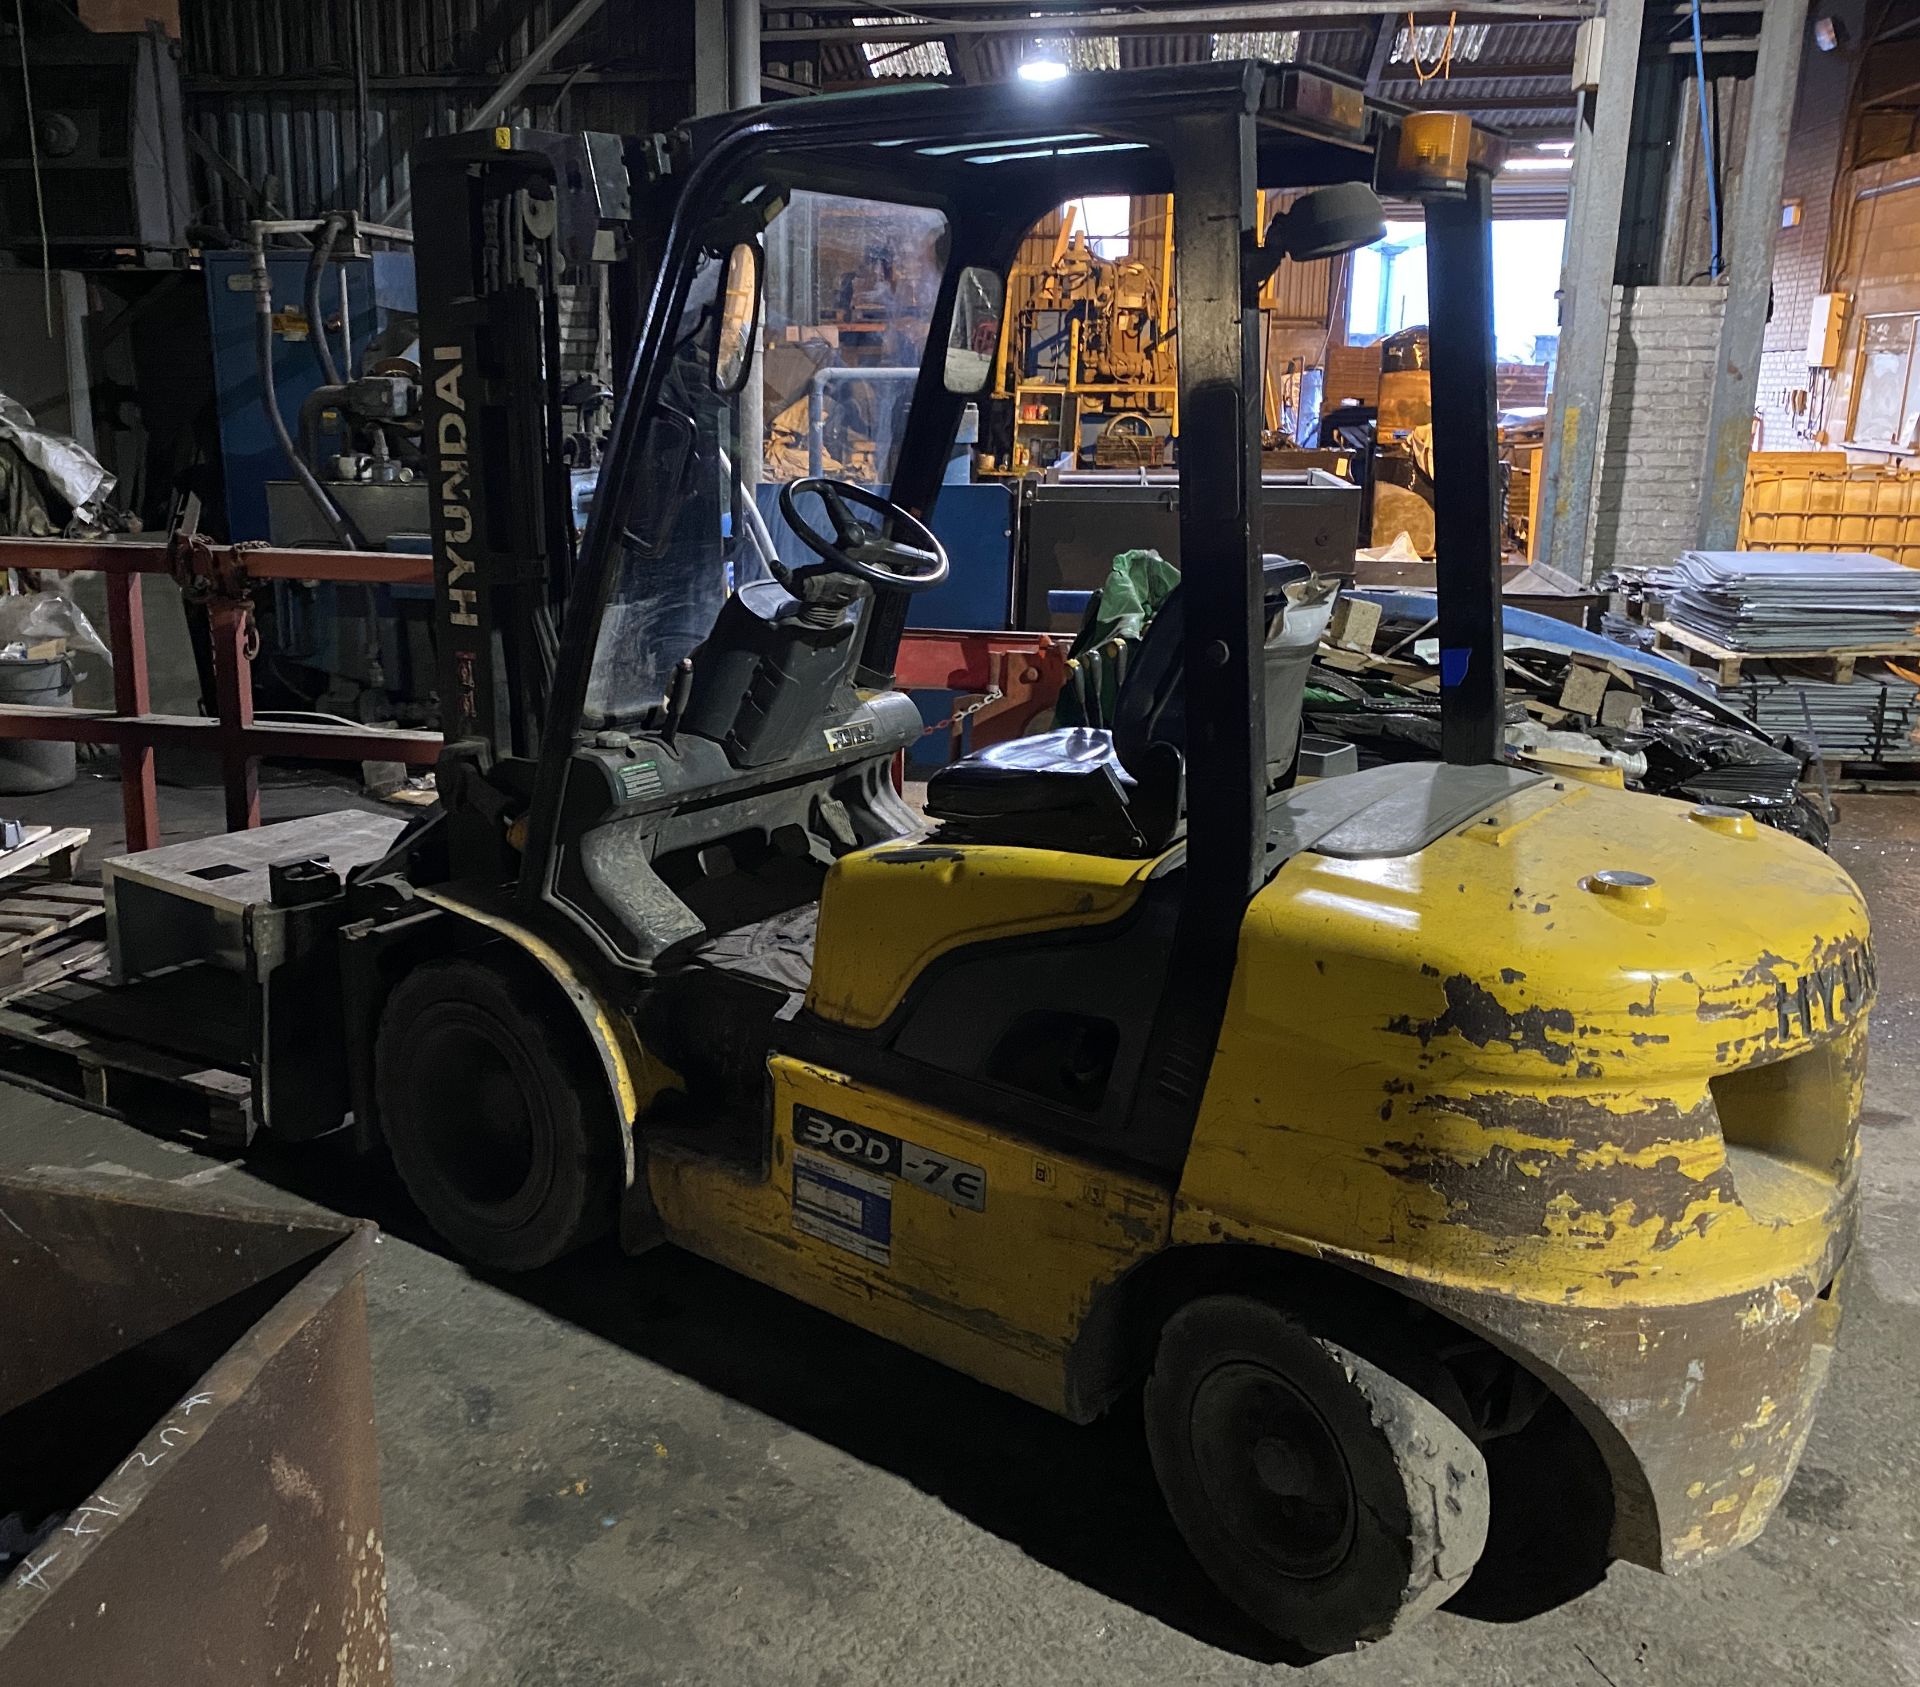 Hyundai 30D-7E Diesel forklift with triplex mast and piping for side shift,